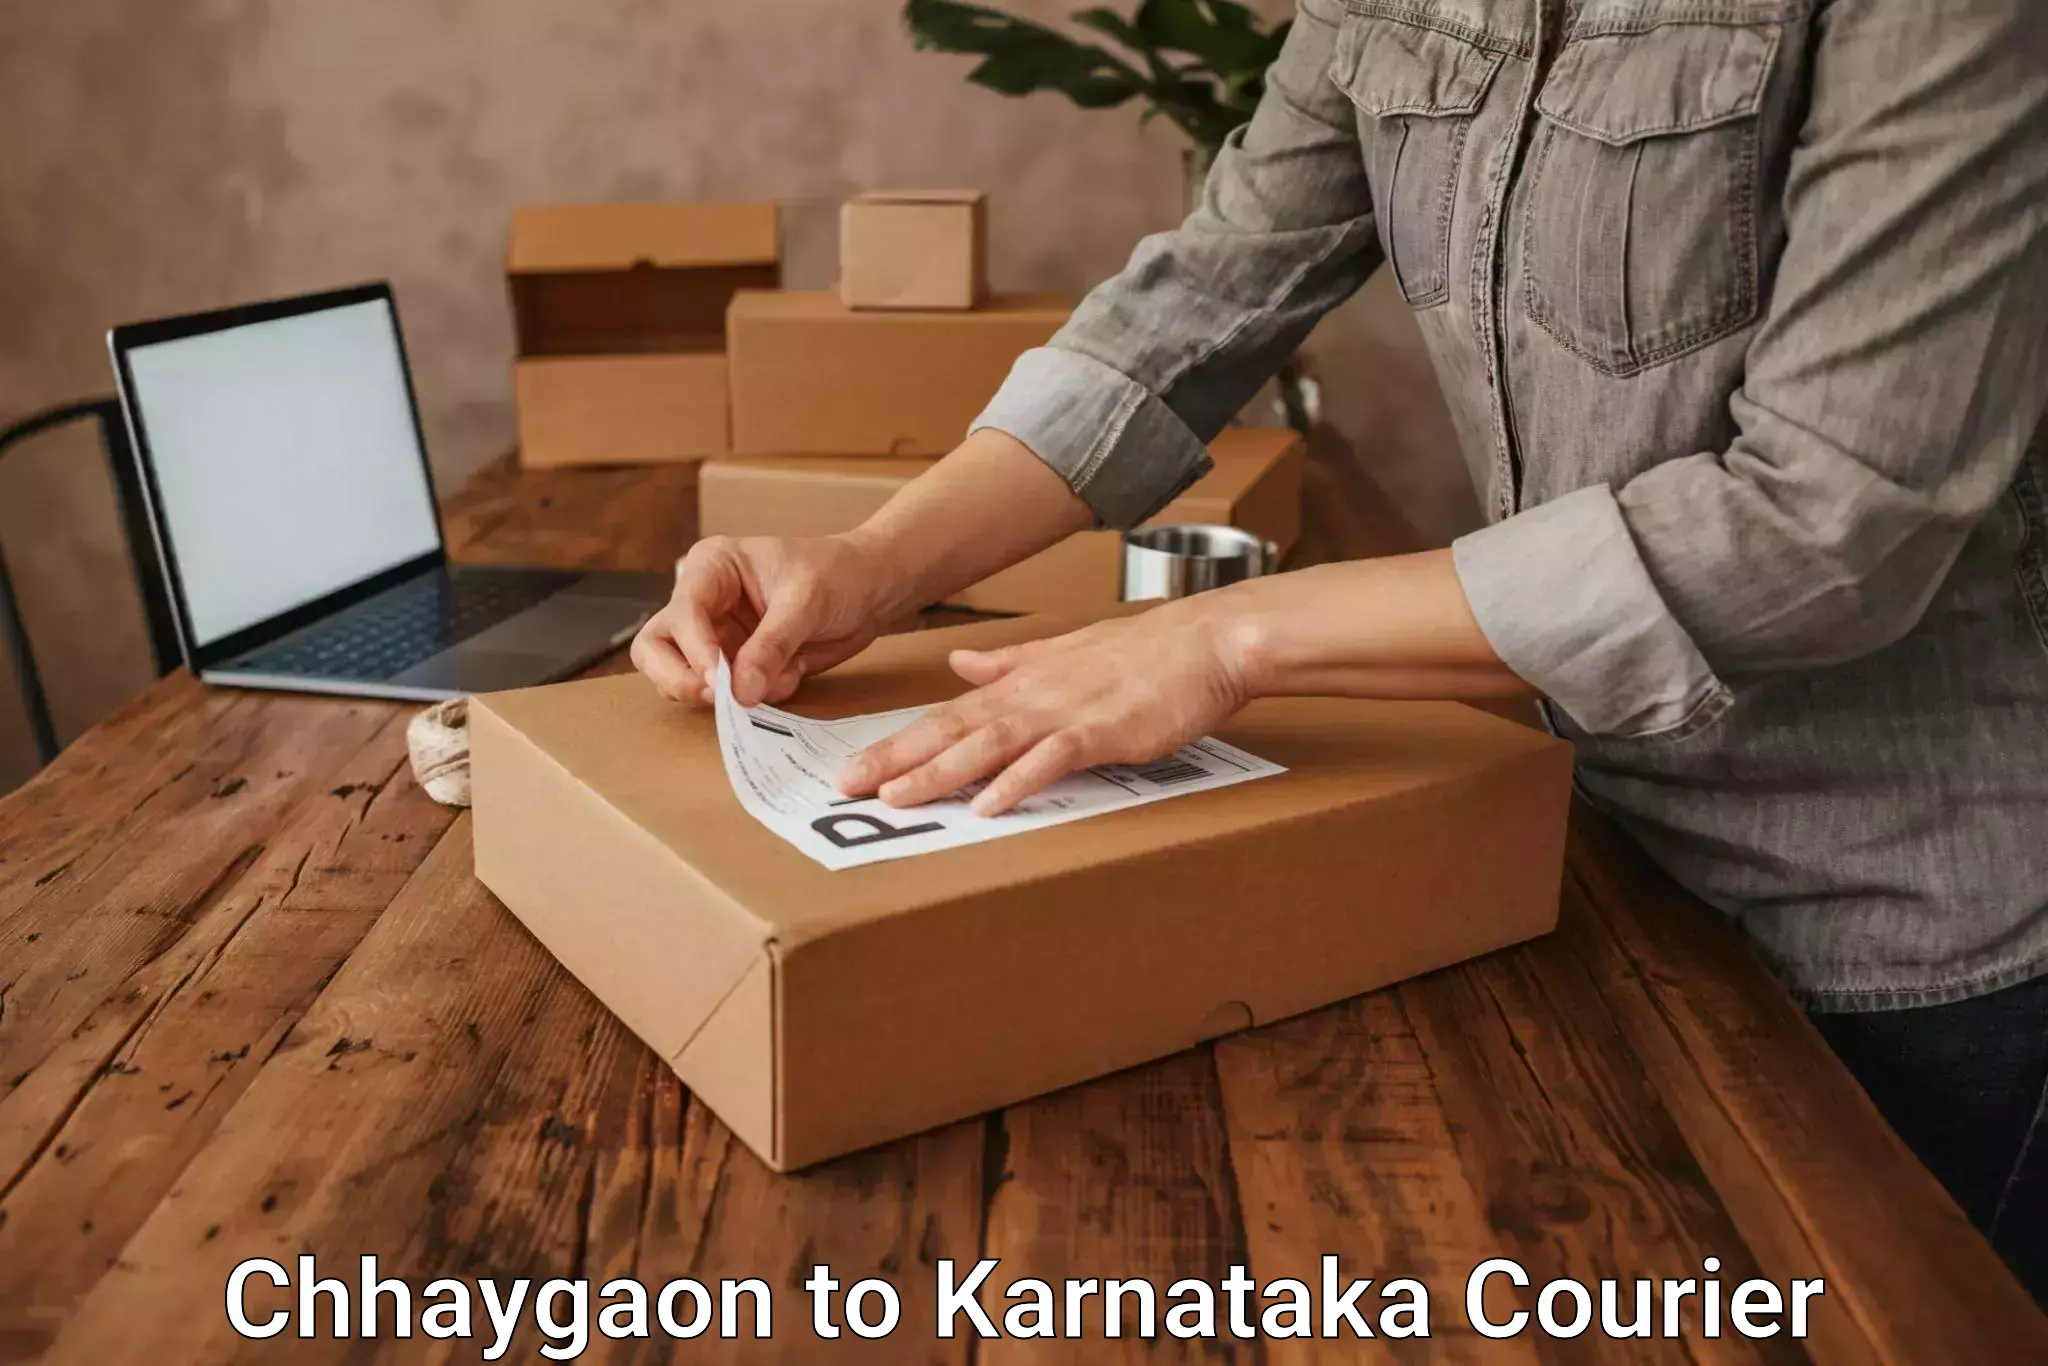 Professional courier handling Chhaygaon to Mysore University